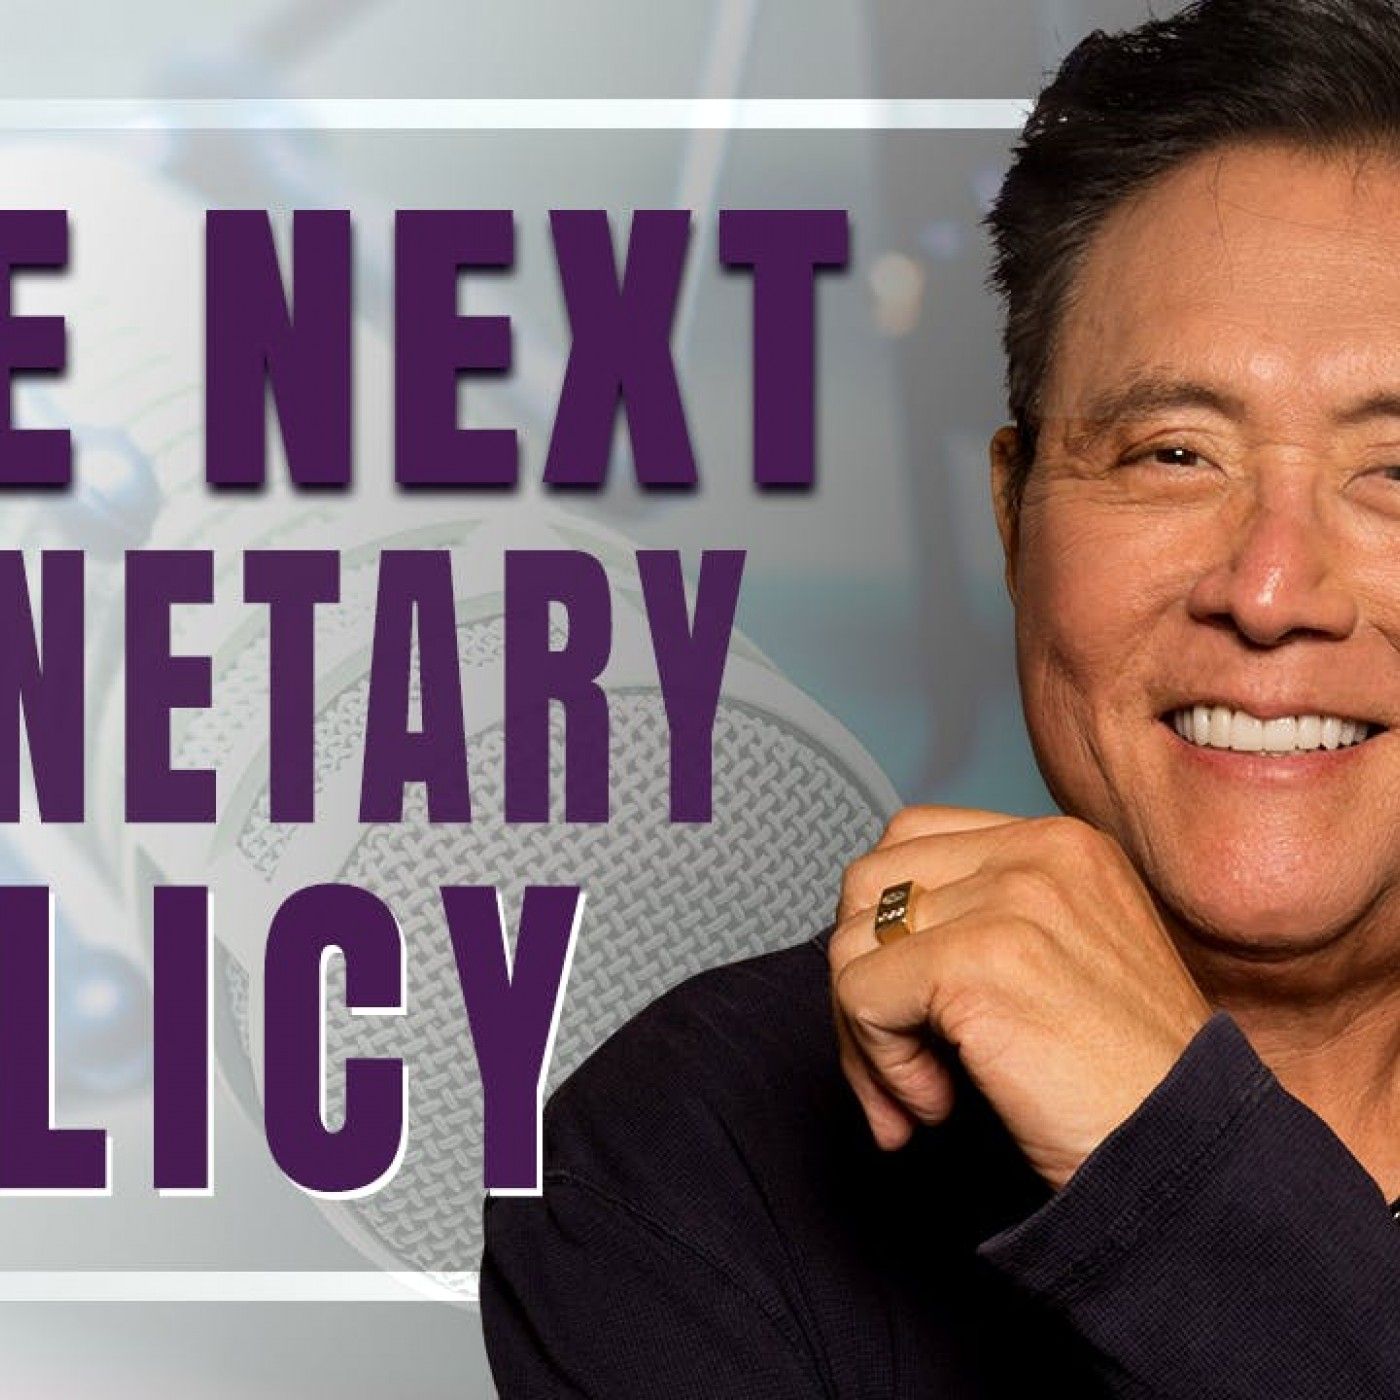 Find Out What the Next Monetary Policy Will Be - Featuring Robert Kiyosaki with guest Richard Duncan